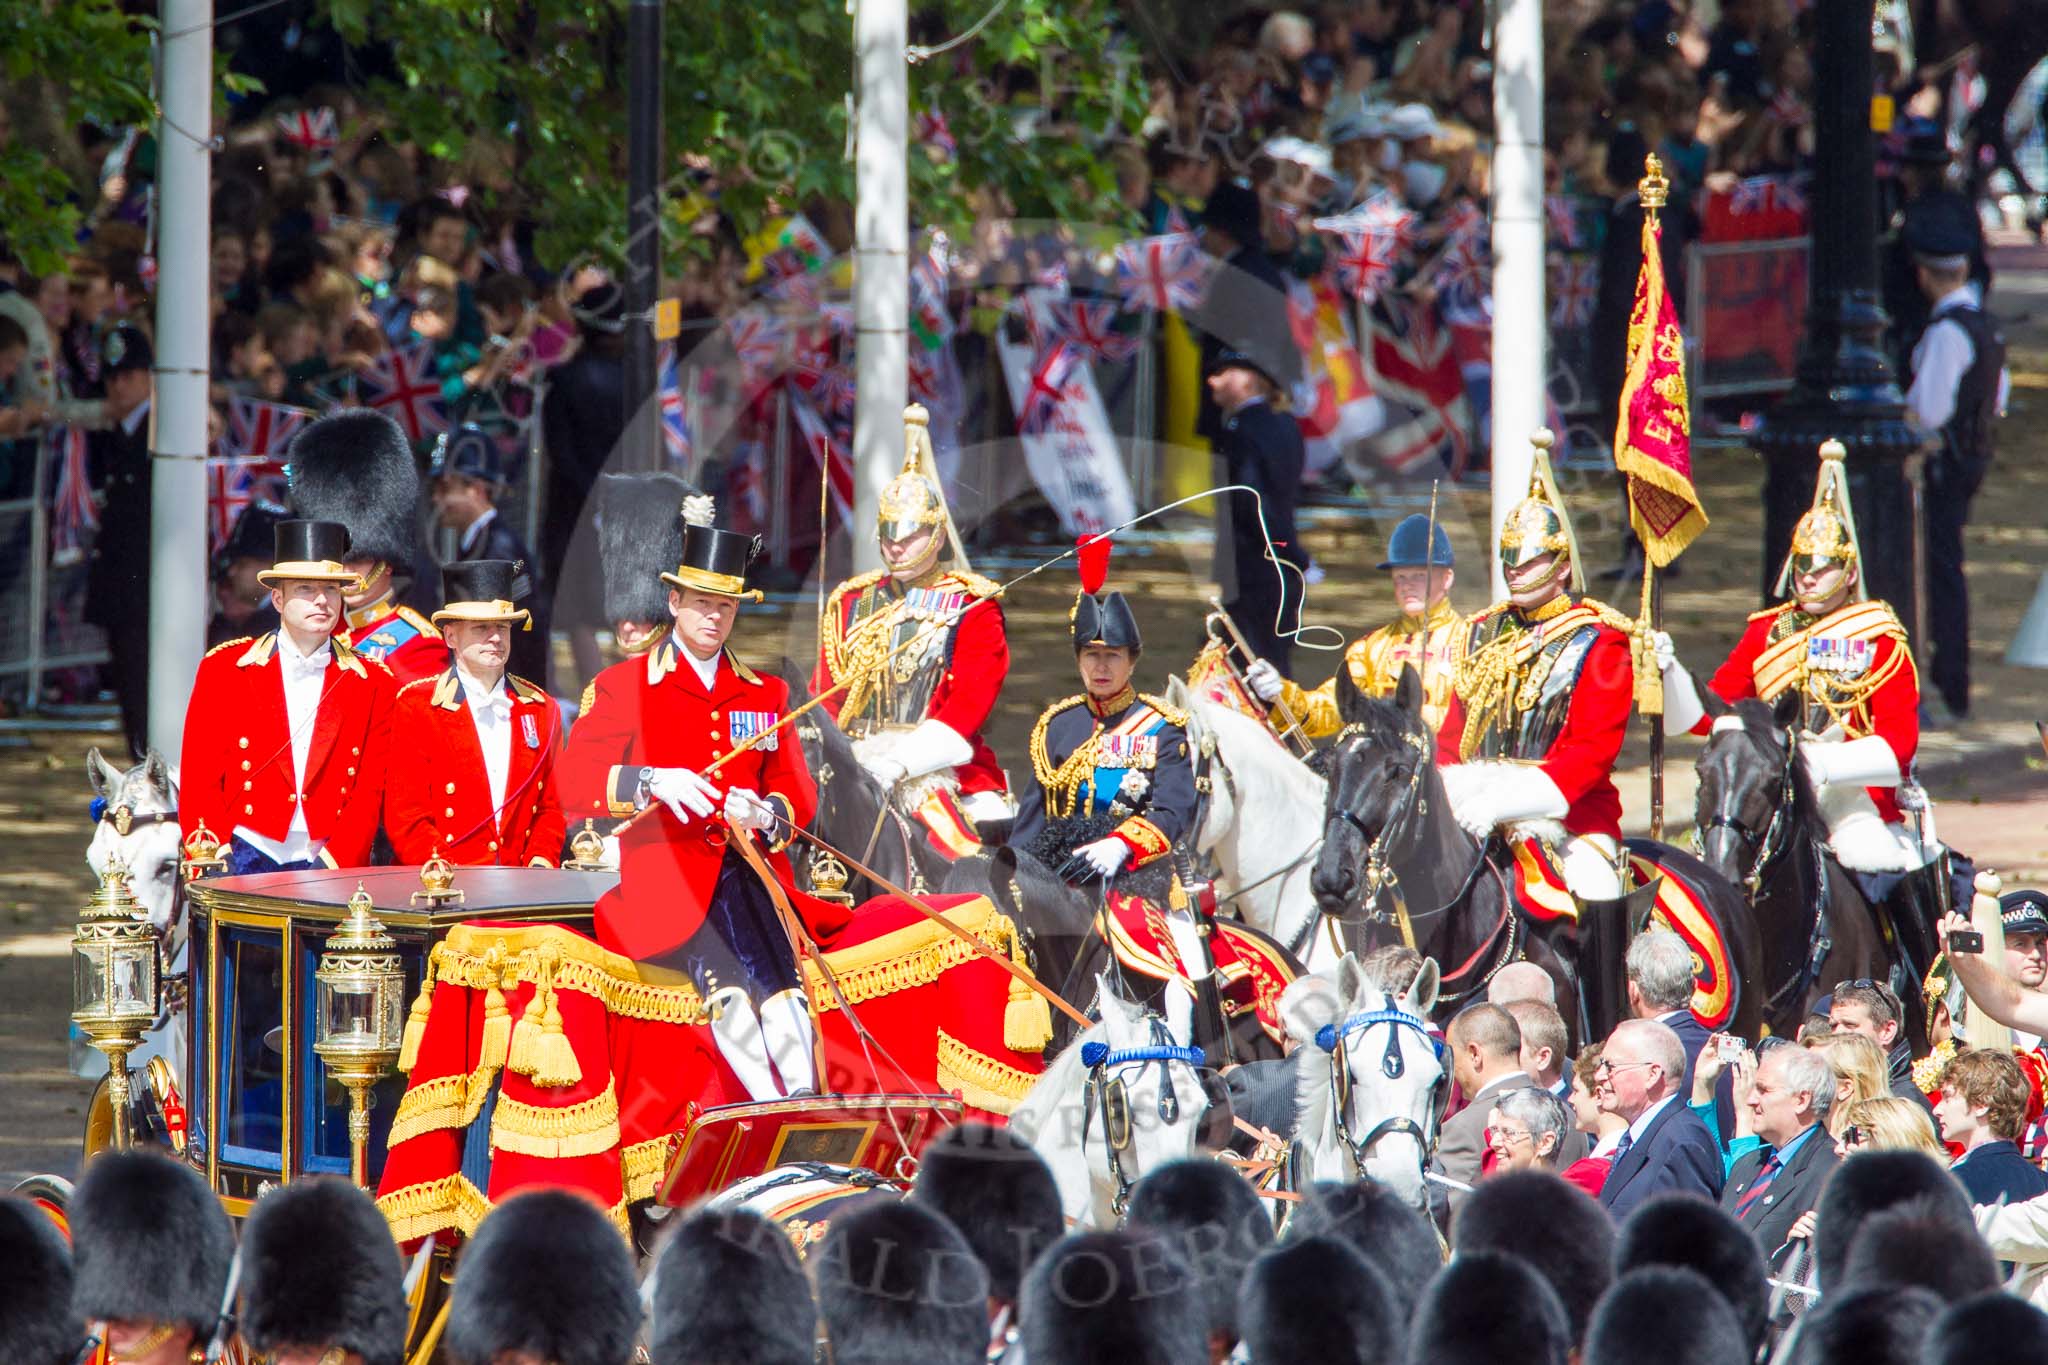 Trooping the Colour 2013: The Glass Coach carrying HM The Queen arrives at Horse Guards Parade. Behind three Royal Colonels, HRH The Duke of Cambridge, HRH The Prince of Wales, and HRH The Princess Royal. Behind them the Field Officer of the Escort, the Escort Commander, Standard Coverer, Standard Bearer, and Trumpeter. Image #253, 15 June 2013 10:58 Horse Guards Parade, London, UK